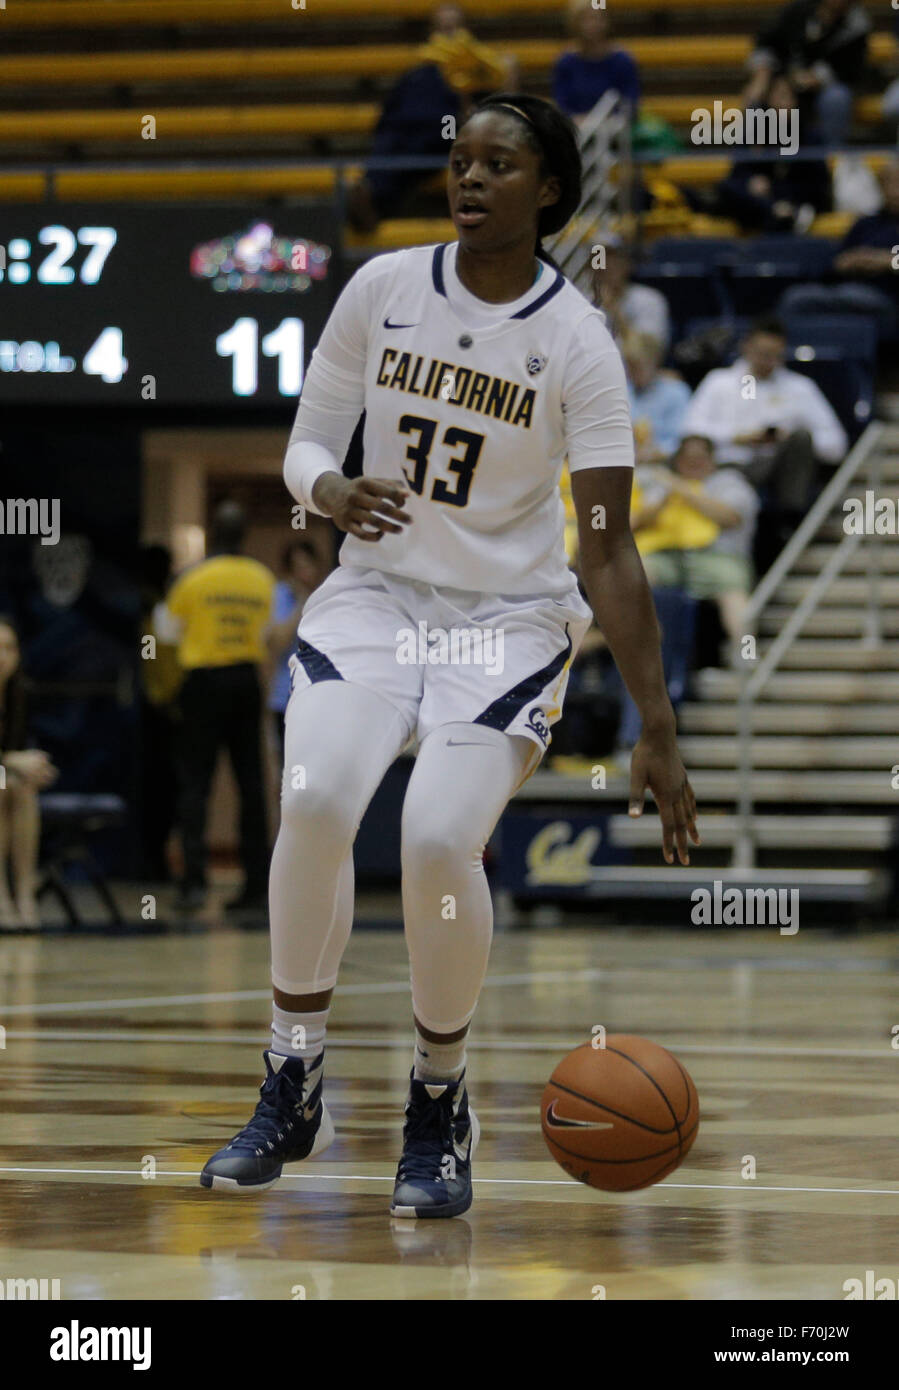 Berkeley USA CA. 22nd Nov, 2015. California G # 33 Gabby Green game stats 12 points, 5 assists and 6 steals during NCAA Women's Basketball game between Cal Poly San Luis Obispo Mustangs and the California Golden Bears 82-57 win at Hass Pavilion Berkeley Calif. Thurman James/CSM/Alamy Live News Stock Photo